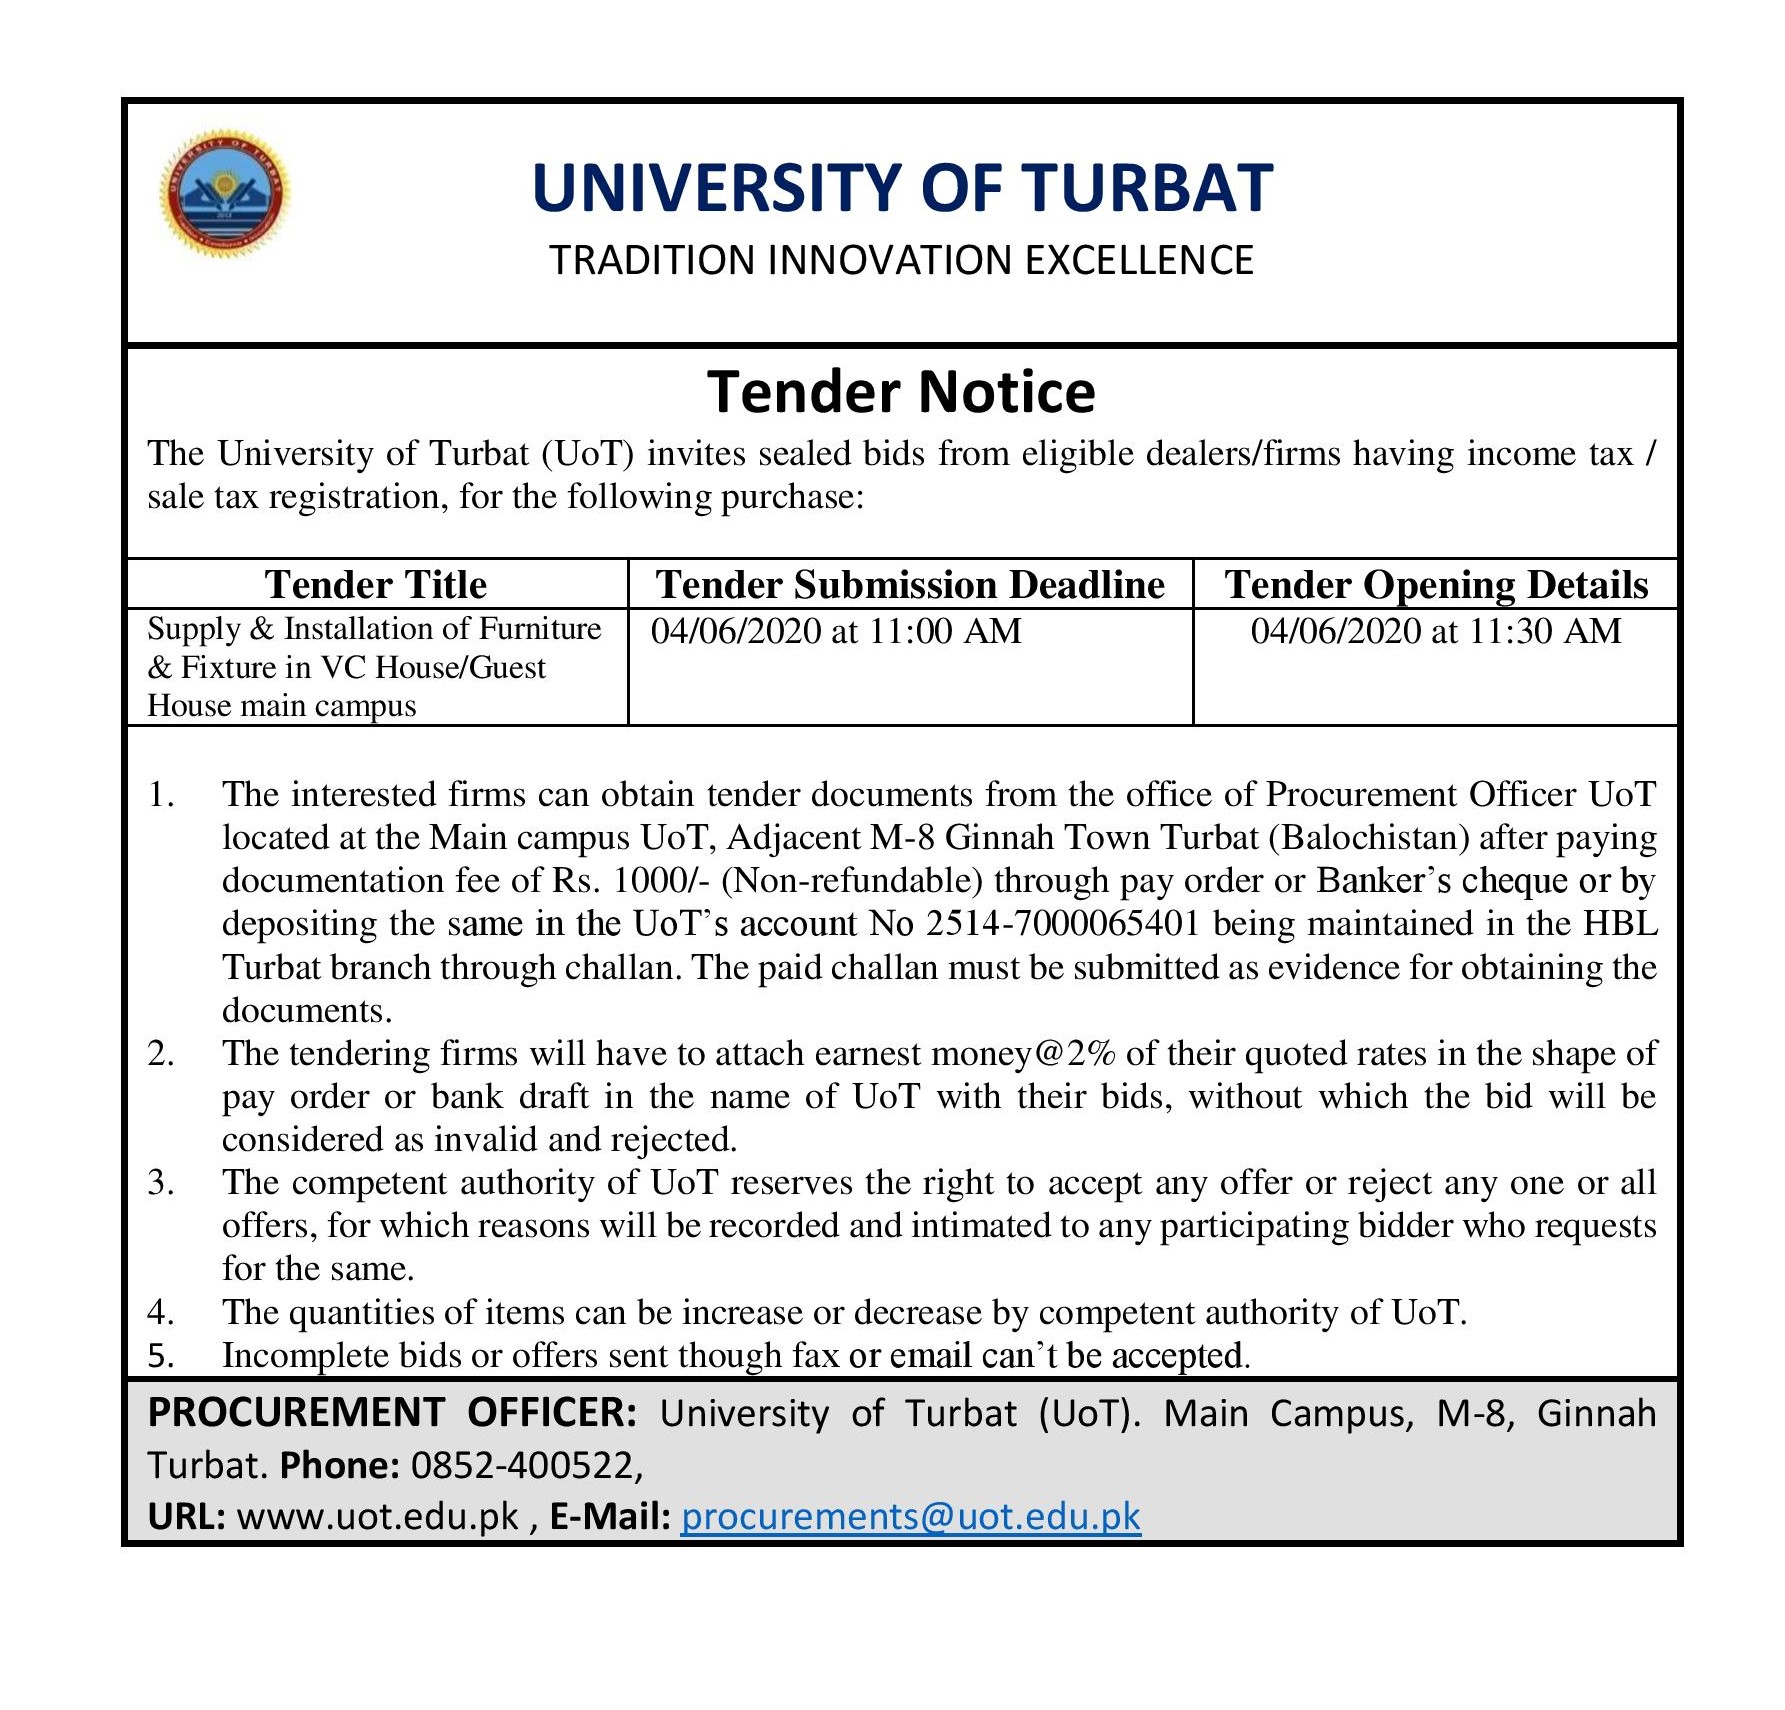 Tender Notice (Supply of Furniture & Fixture for VC House/ Guest House at UoT main campus)